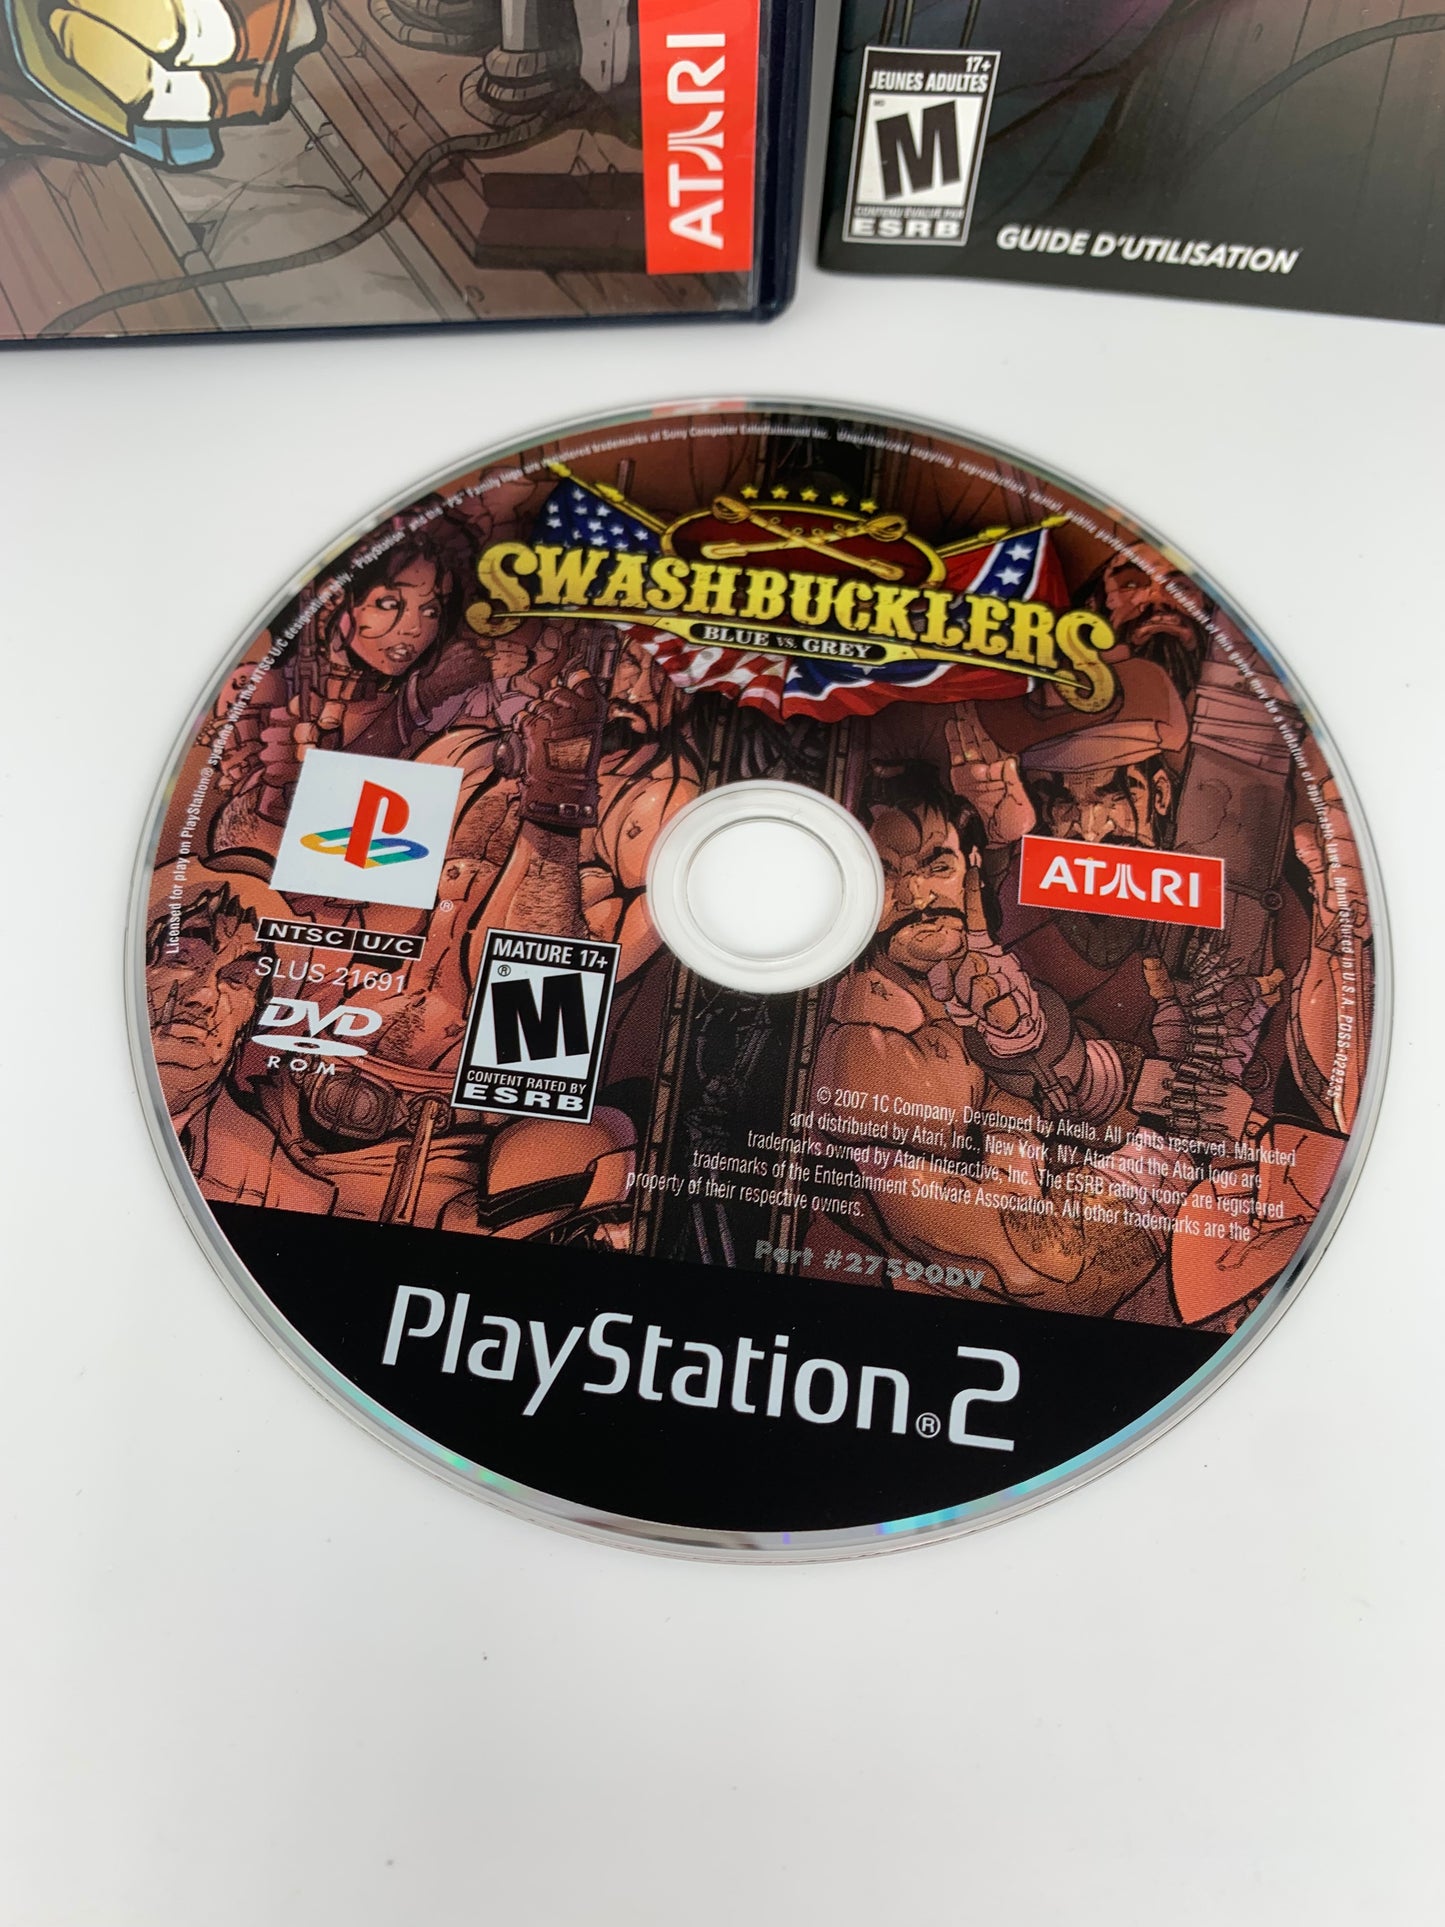 SONY PLAYSTATiON 2 [PS2] | SWASHBUCKLERS BLUE VS GRAY